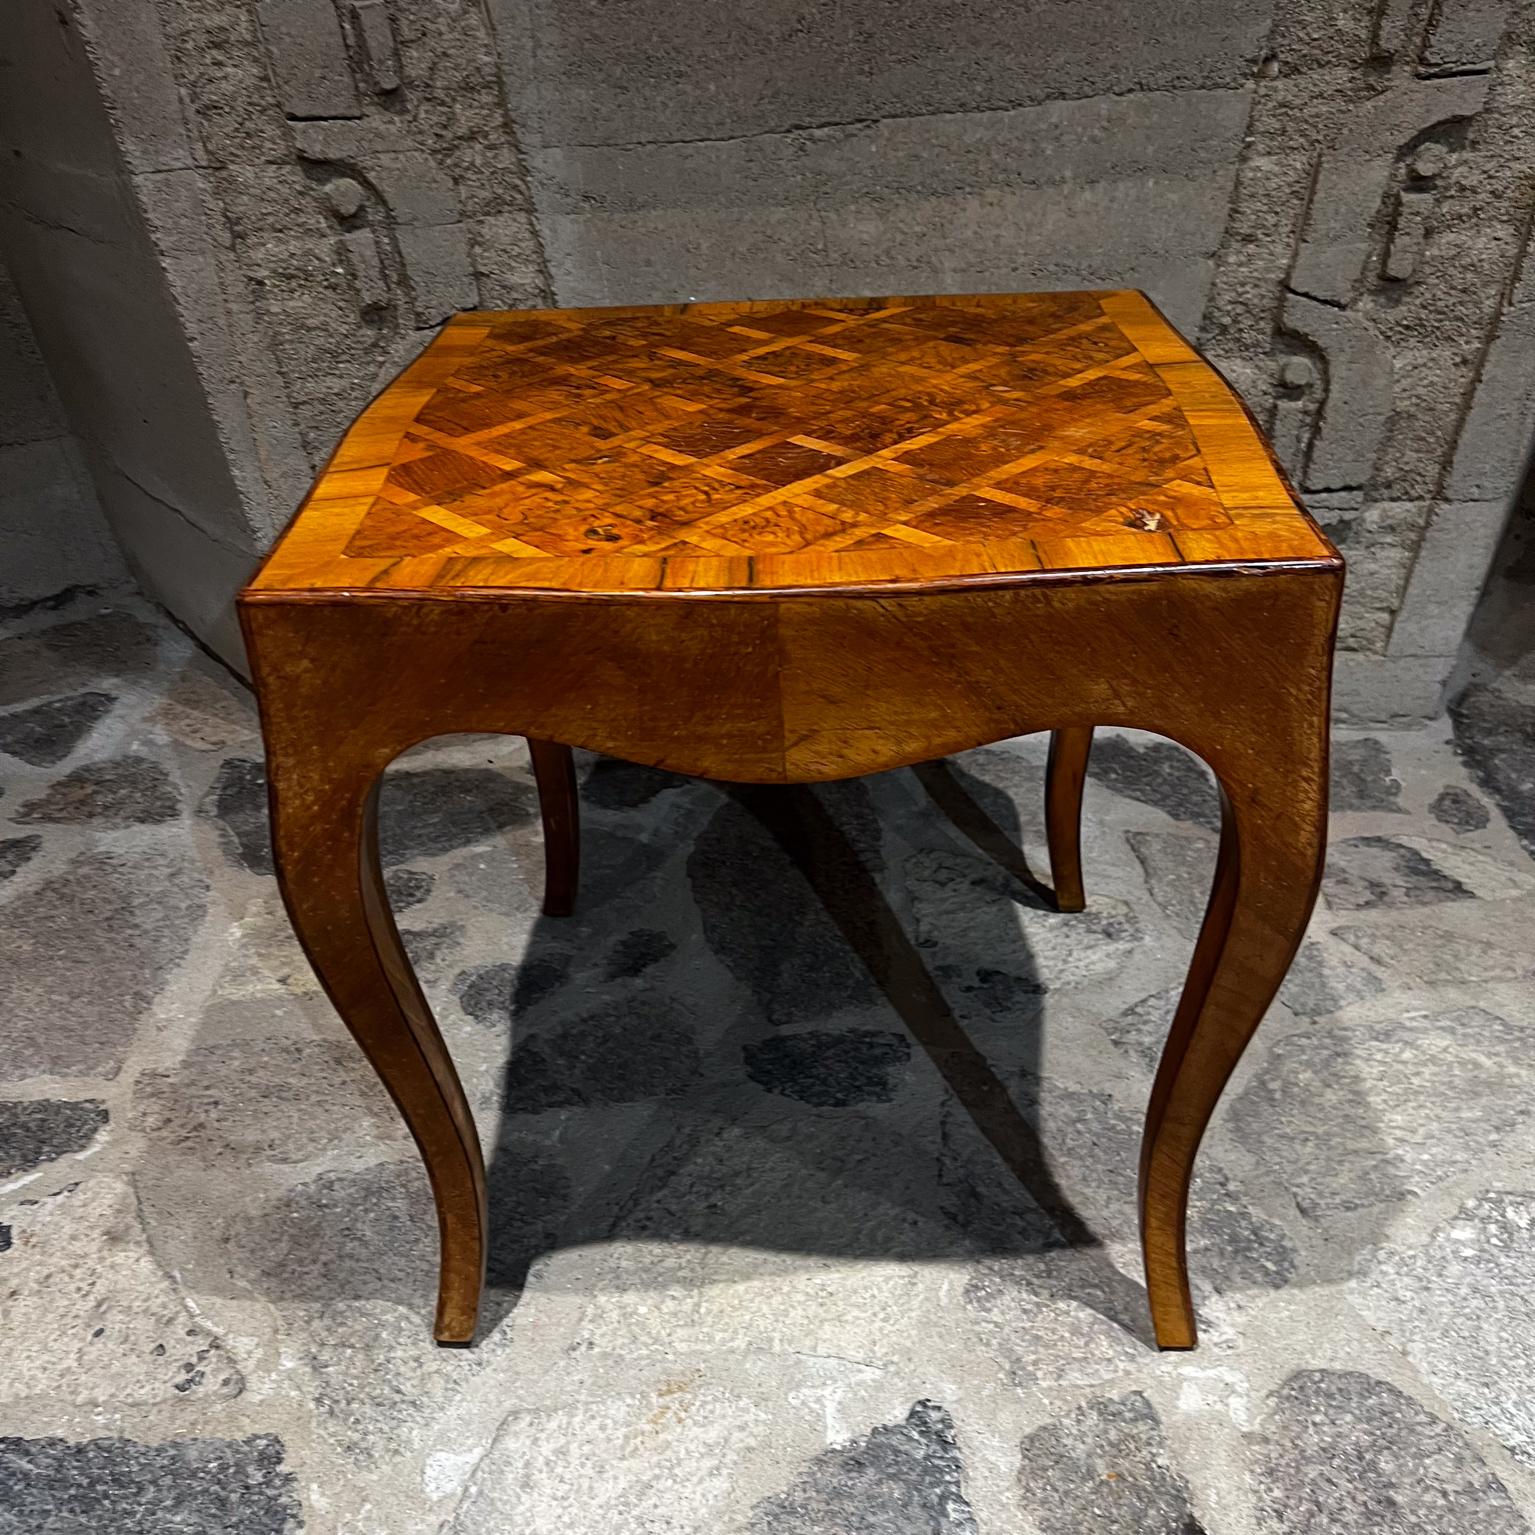 1950s Lovely Italian side table cabriole leg 
Wood marquetry inlaid top.
21 x 21 x 22 h
Label.
Original unrestored vintage condition
See all images provided